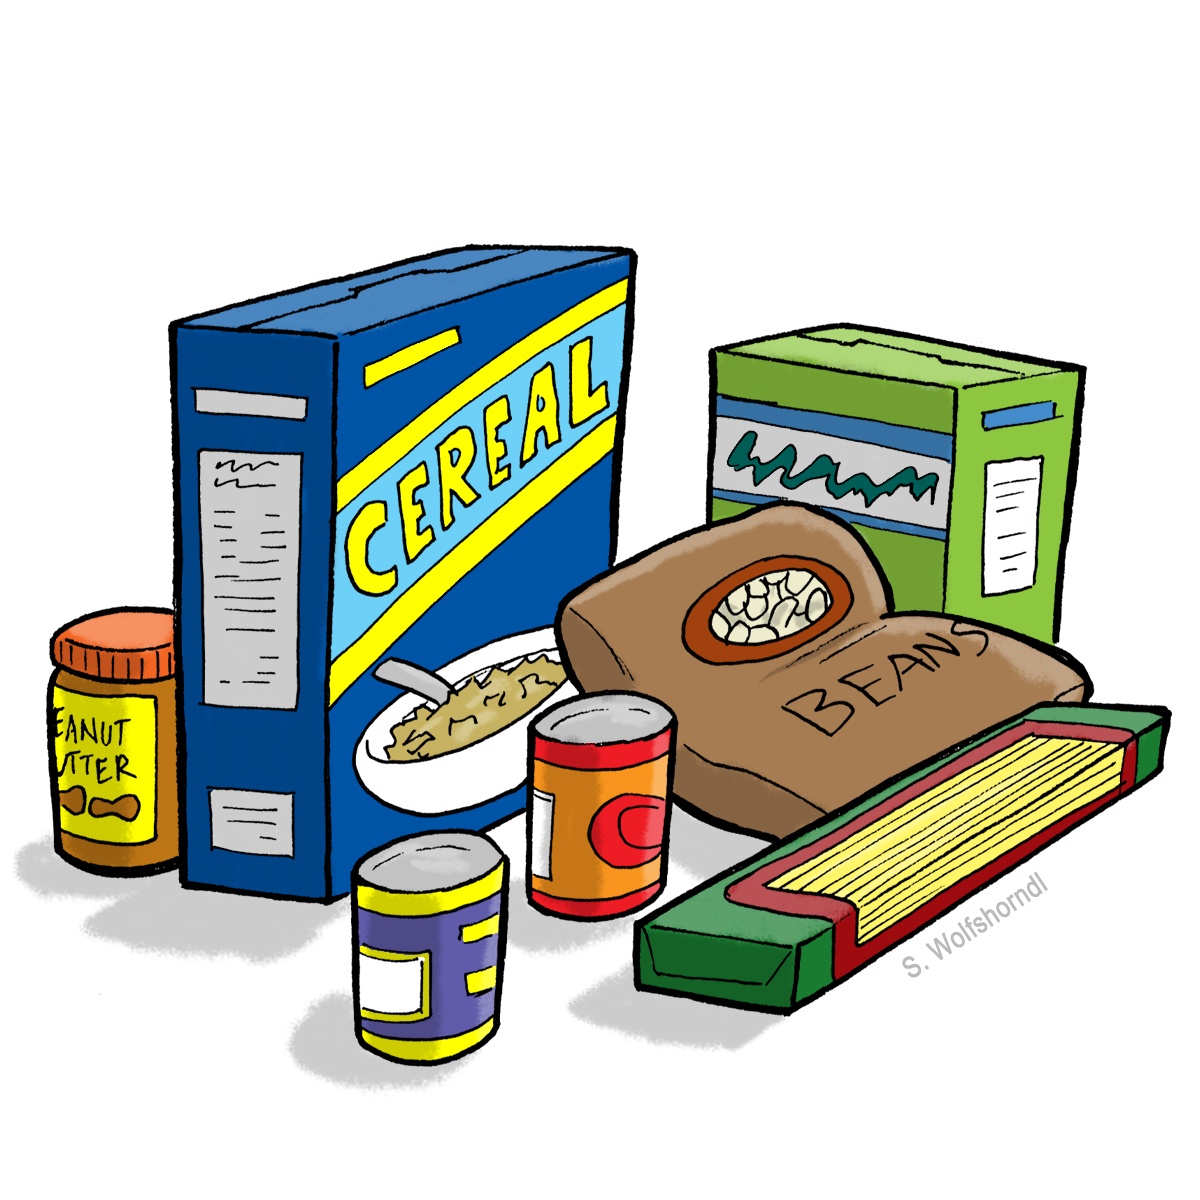 Clip Arts Related To : canned food clip art. view all Food Pantry C...